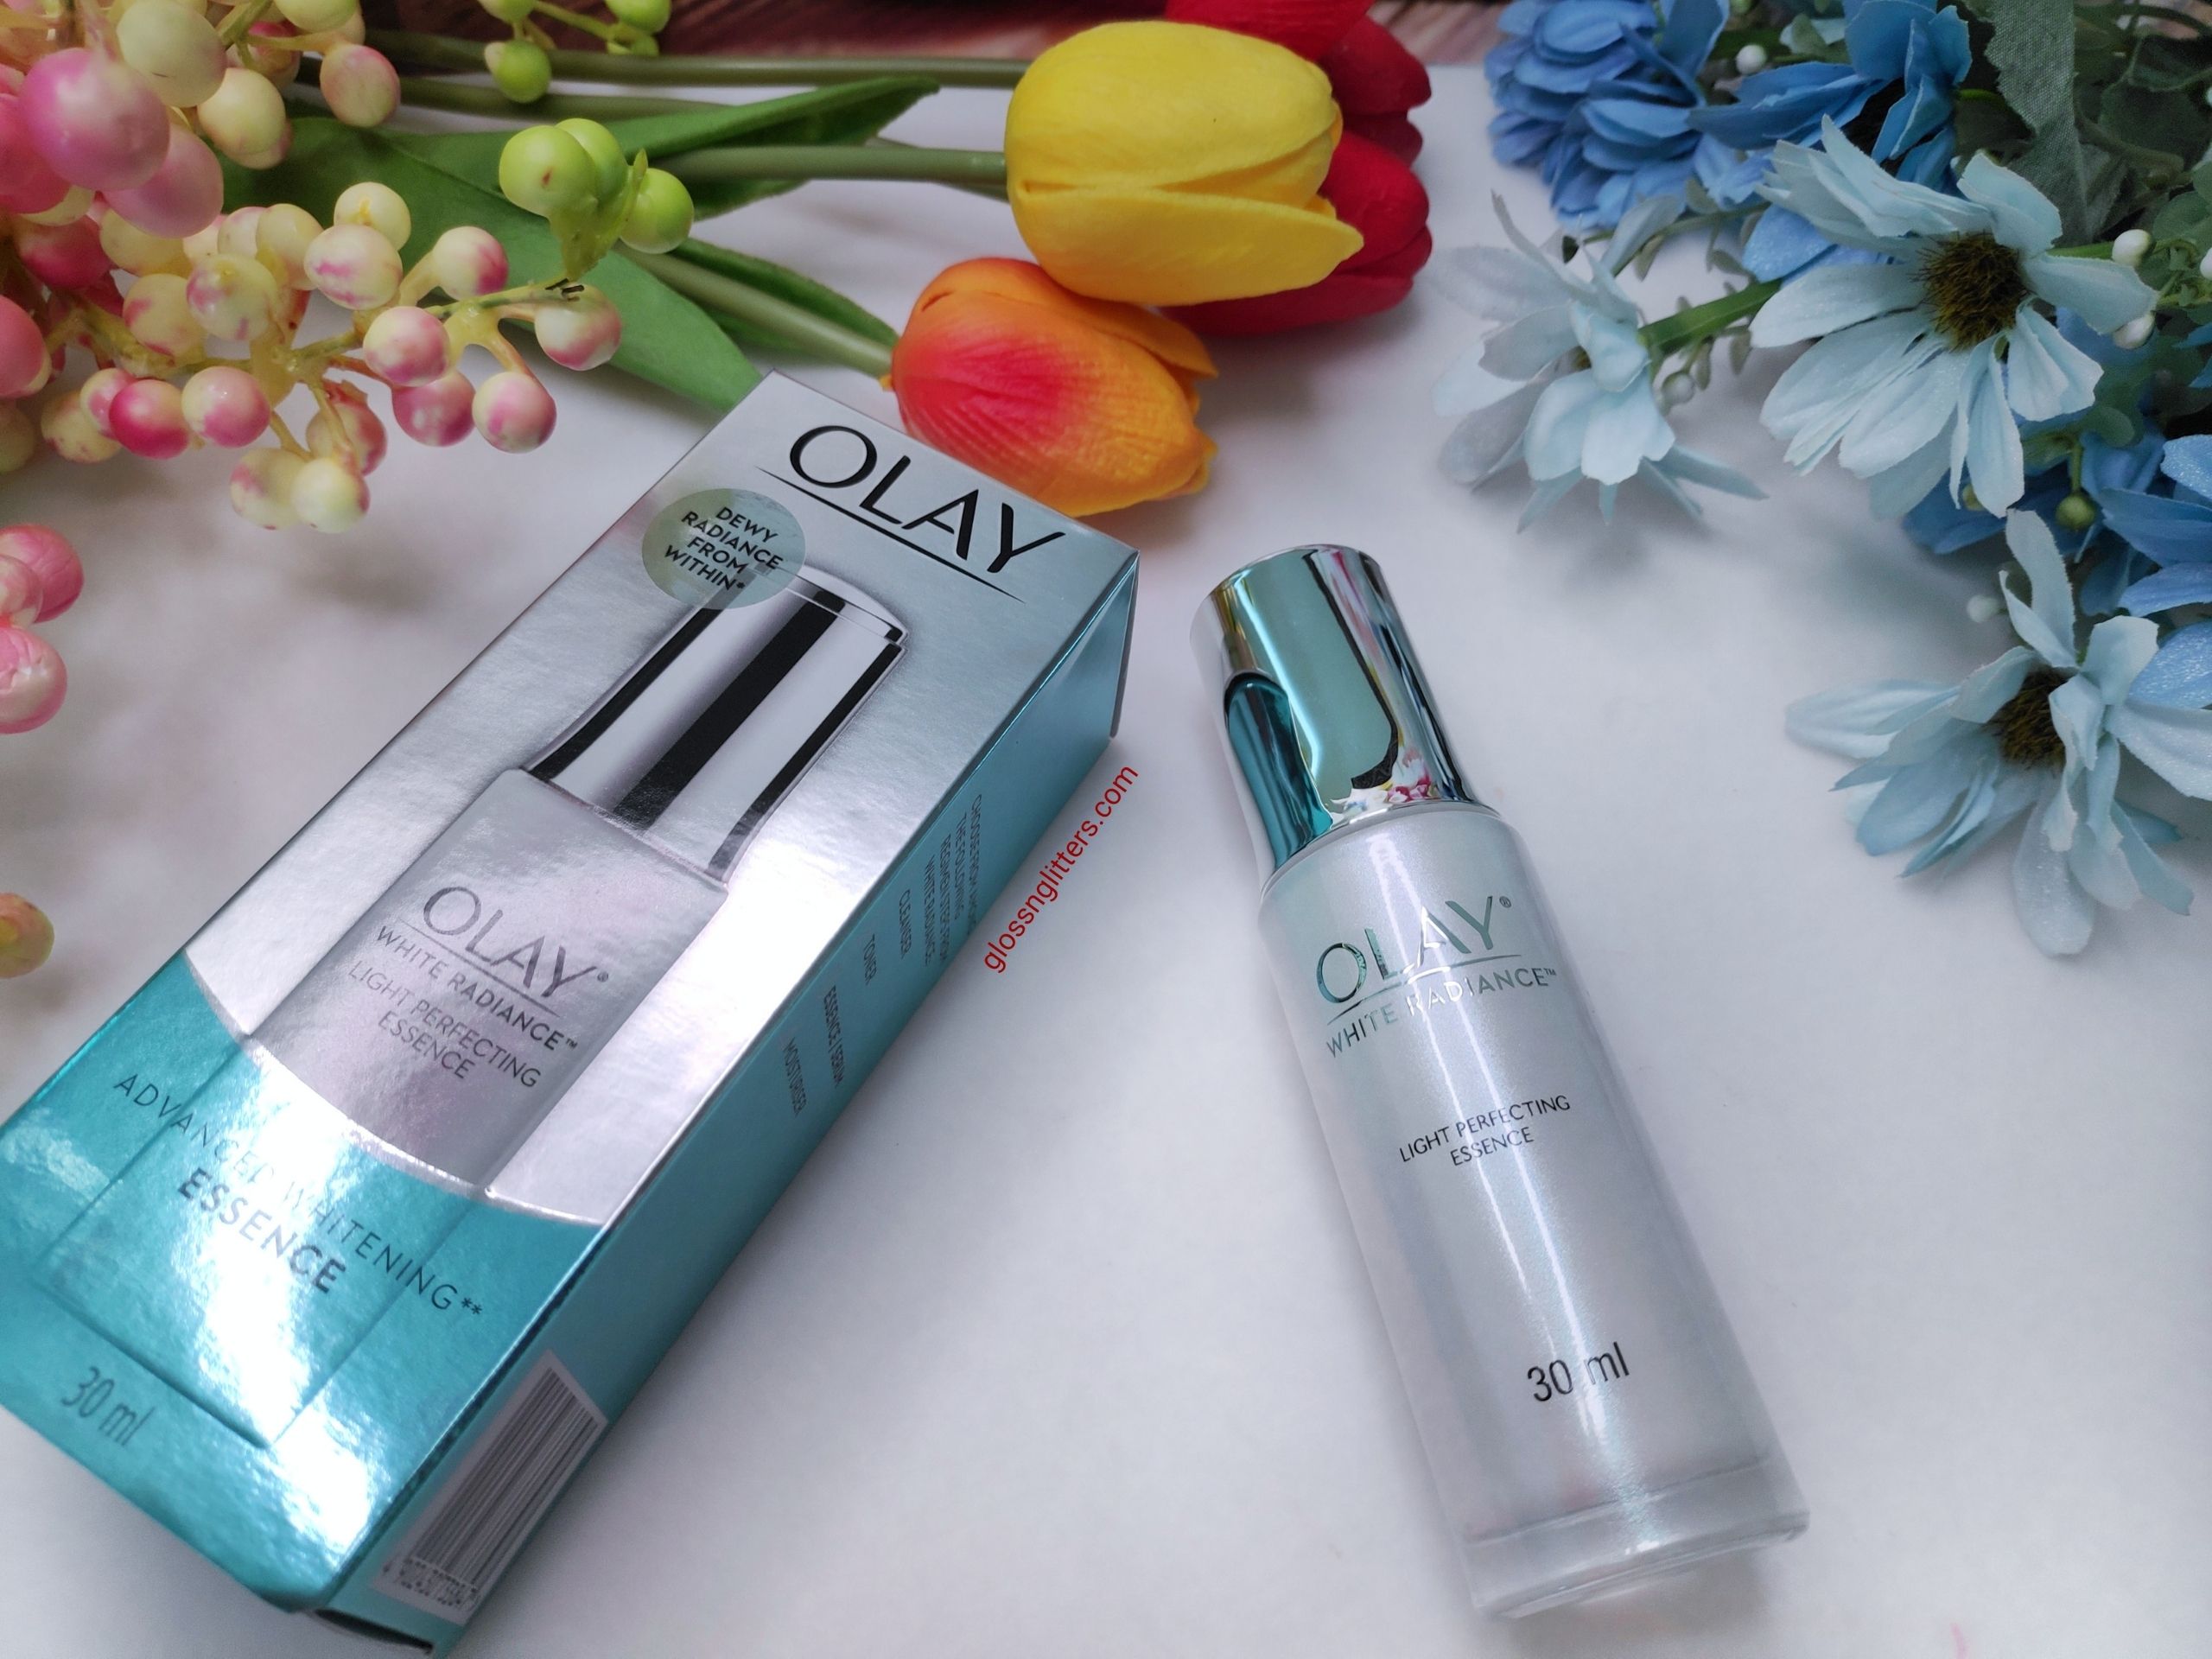 Olay White Radiance Light Perfecting Essence Review